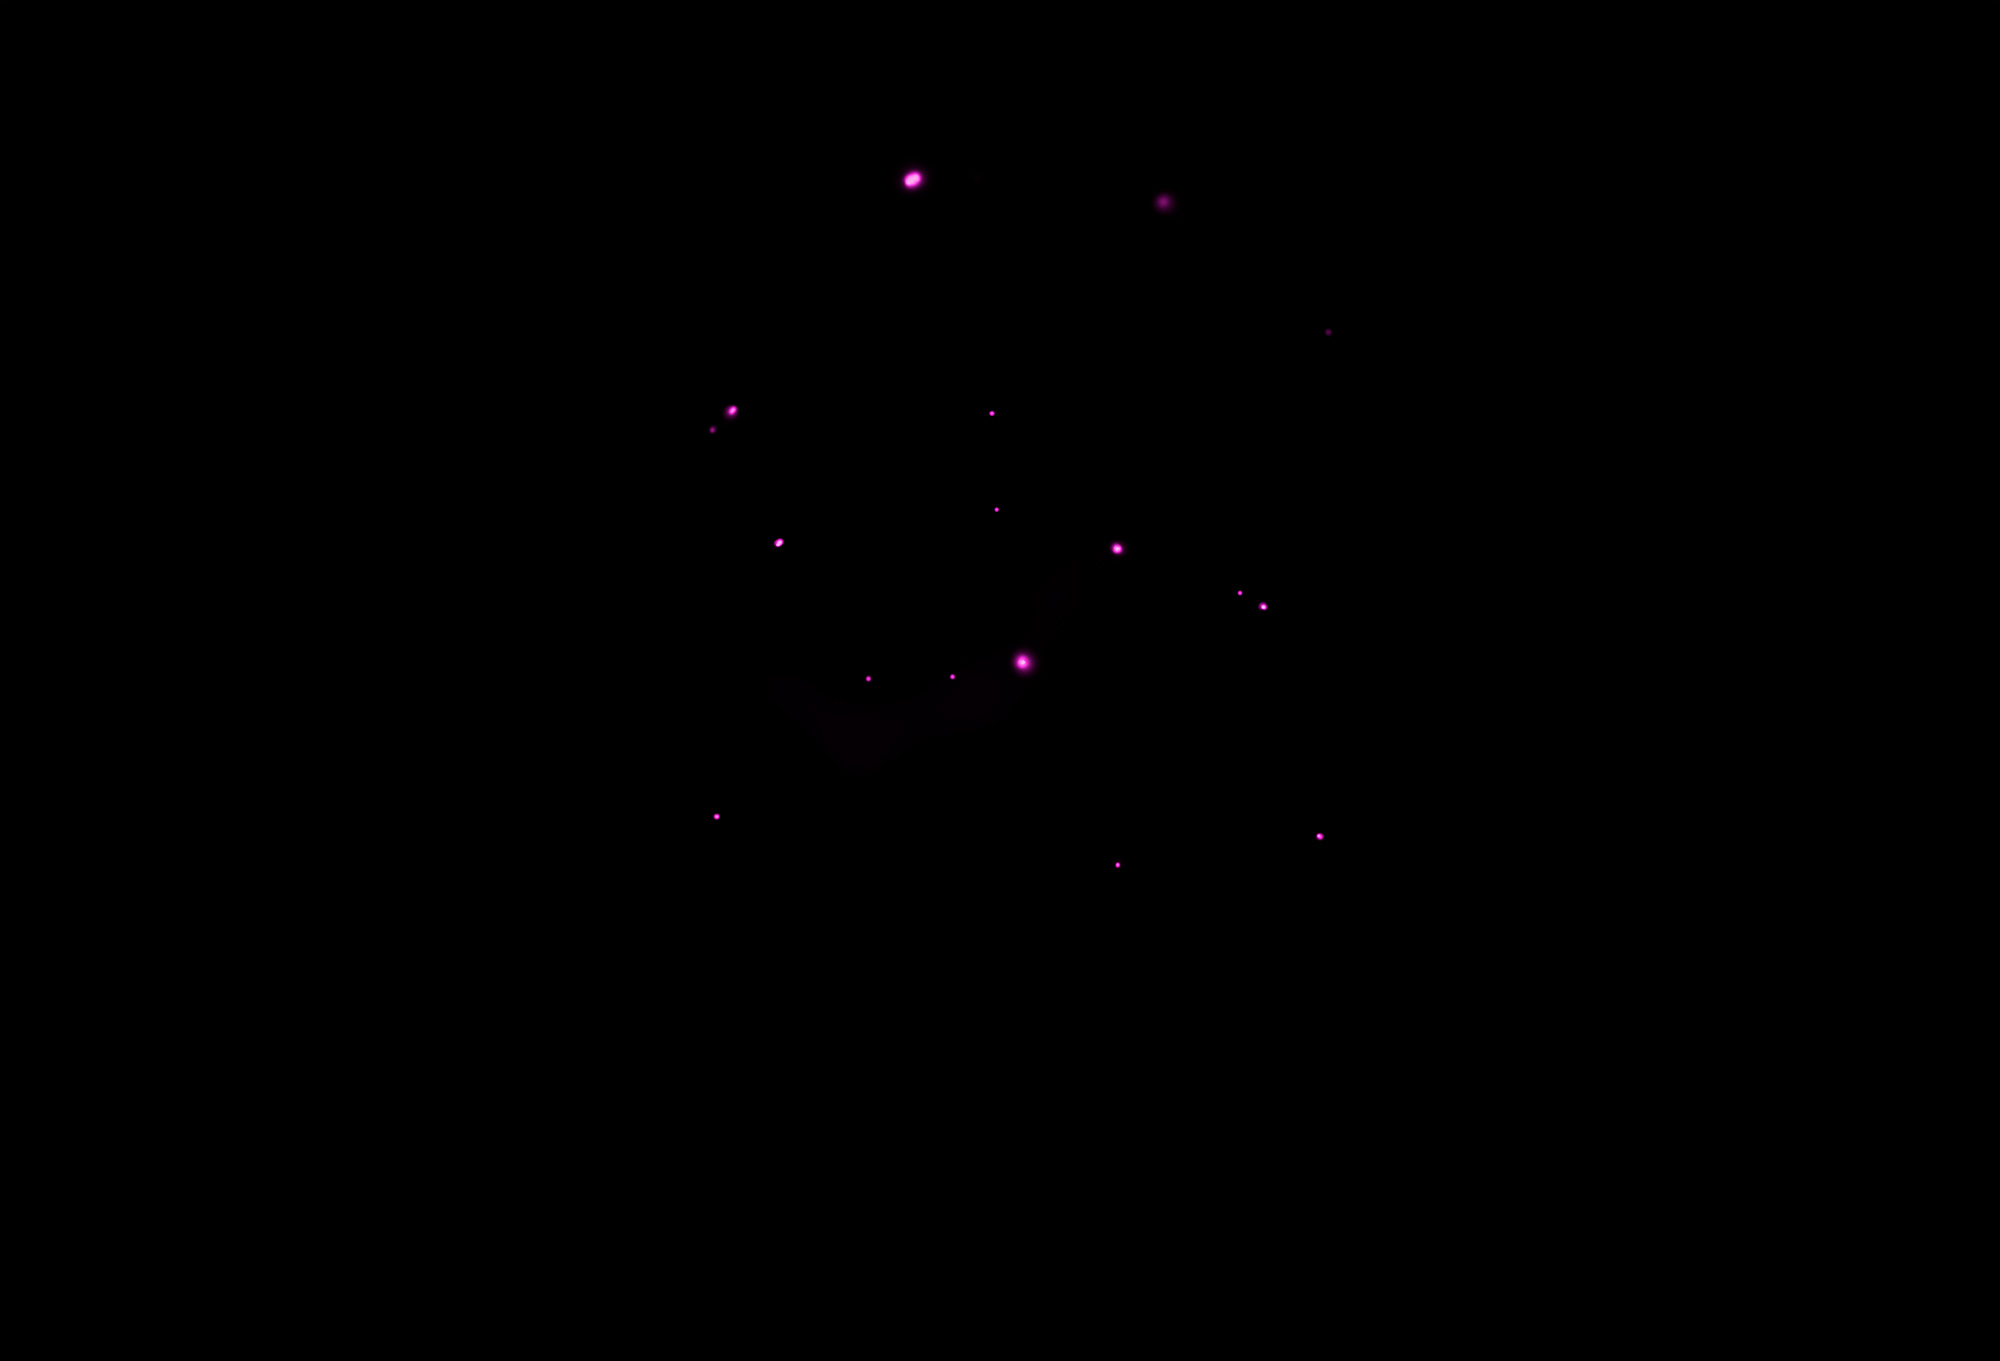 Scattered bright dots on a black background